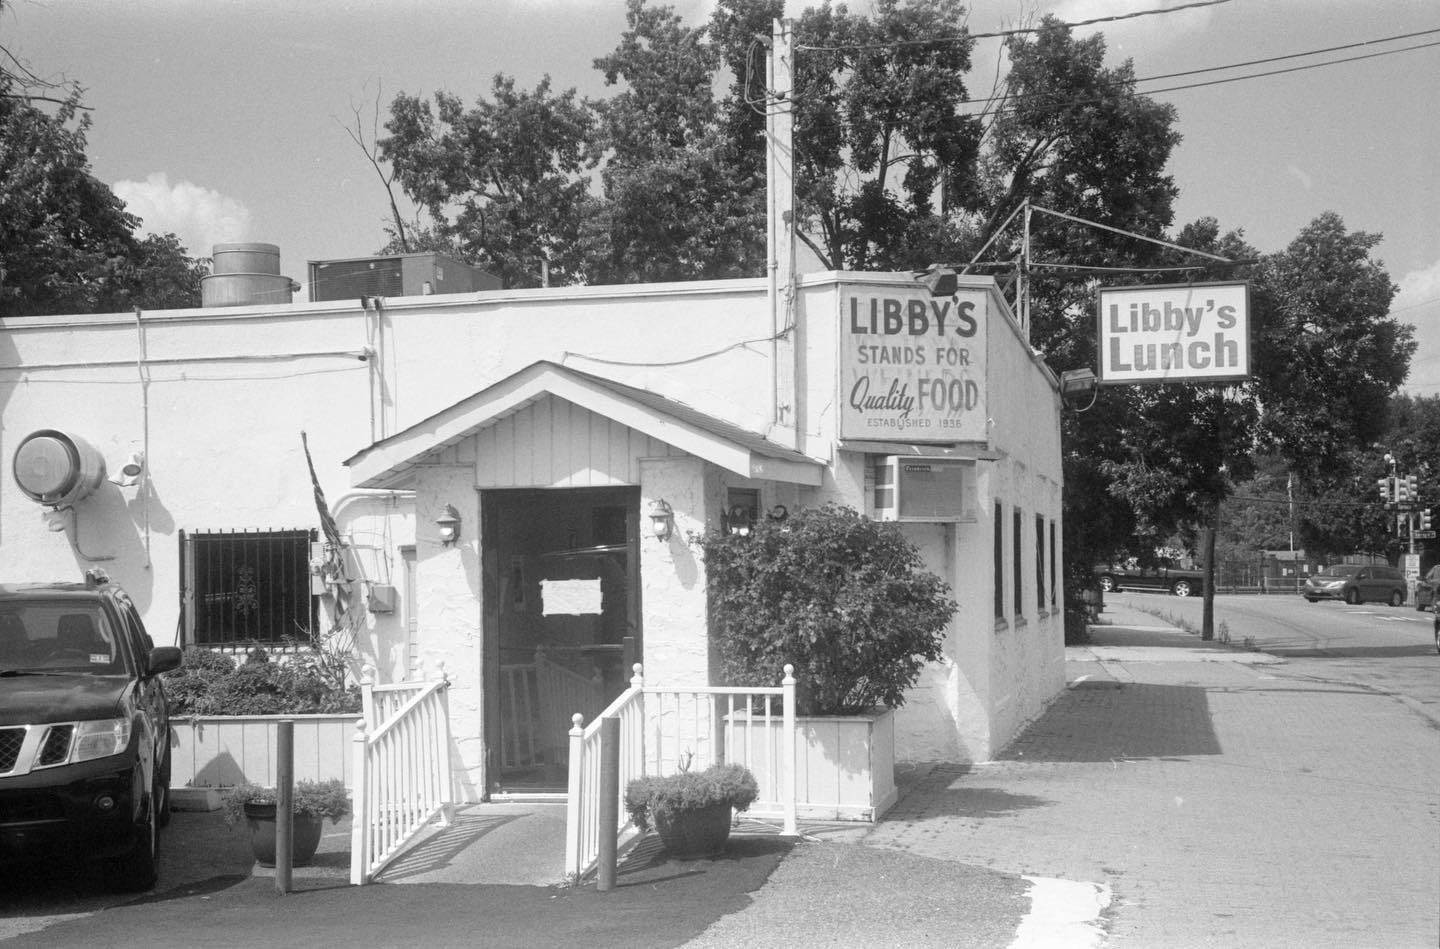 Returning to the theme of Hot Texas Wieners, Libbyâs Lunch in Paterson is one of the first places to originate the dish. Theyâre located near the Great Falls in Paterson on land owned by the city. Unfortunately, they are on the verge of shutting down, as their landlord, the aforementioned city of Paterson, is not happy that they havenât received rent in the past three years. Oops. We went there for takeout this past Sunday so we could experience the greatness of their take on the Hot Texas Wiener while we can. #rollfilmweek #rollfilmweek2020 #film #filmphotography #contaxiii #rodinal